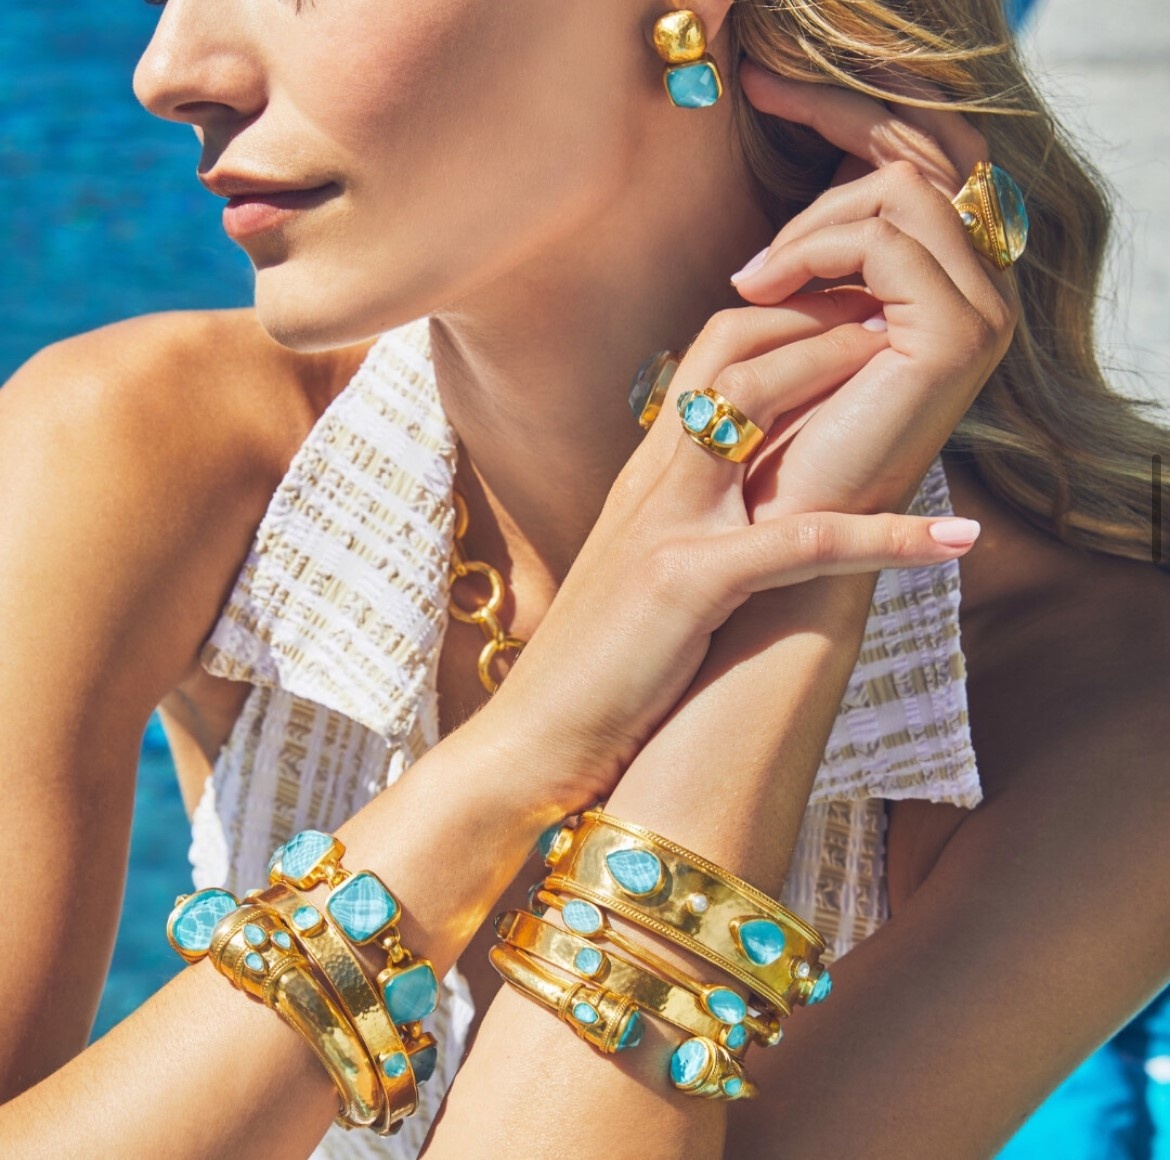 Captivating Capri Blue jewels, stacked & sparkling ✨by #JulieVos at #AlexandersJwlrs

#Armparty #CapriBlue #ResortJewels #24kGold #NewJewelry #JewelryCollection